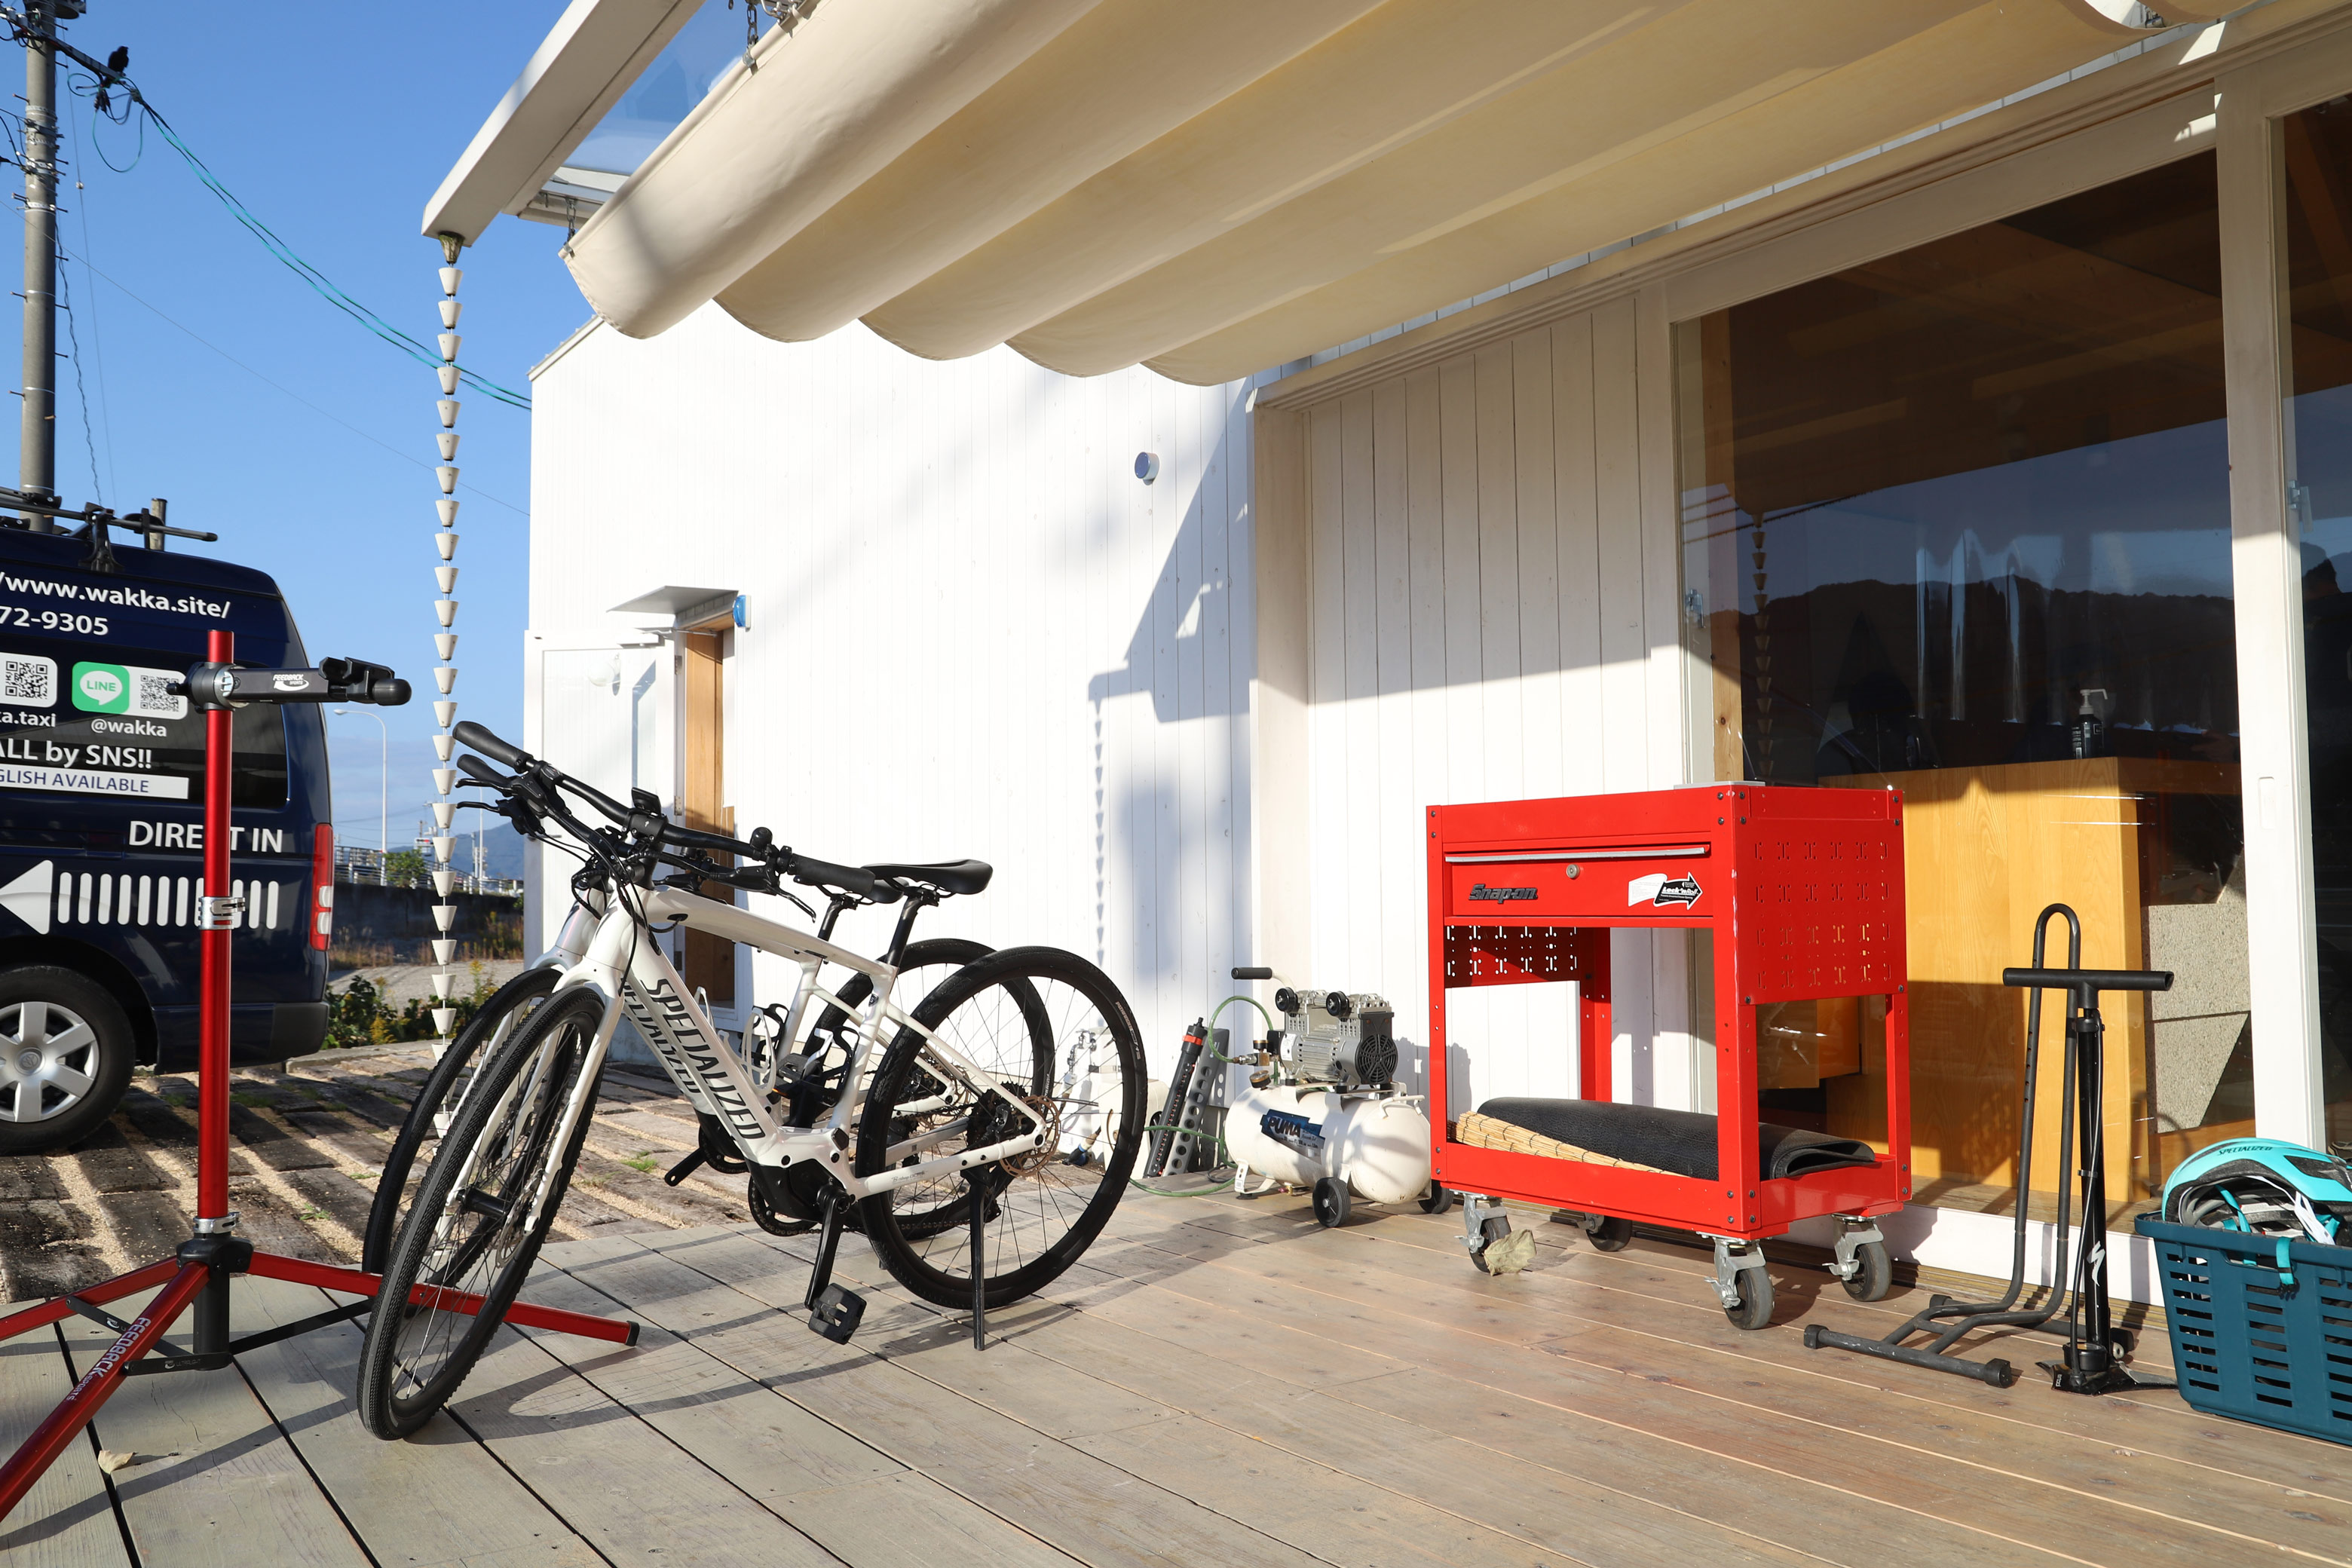 Beginner-friendly substantial bike rental and services